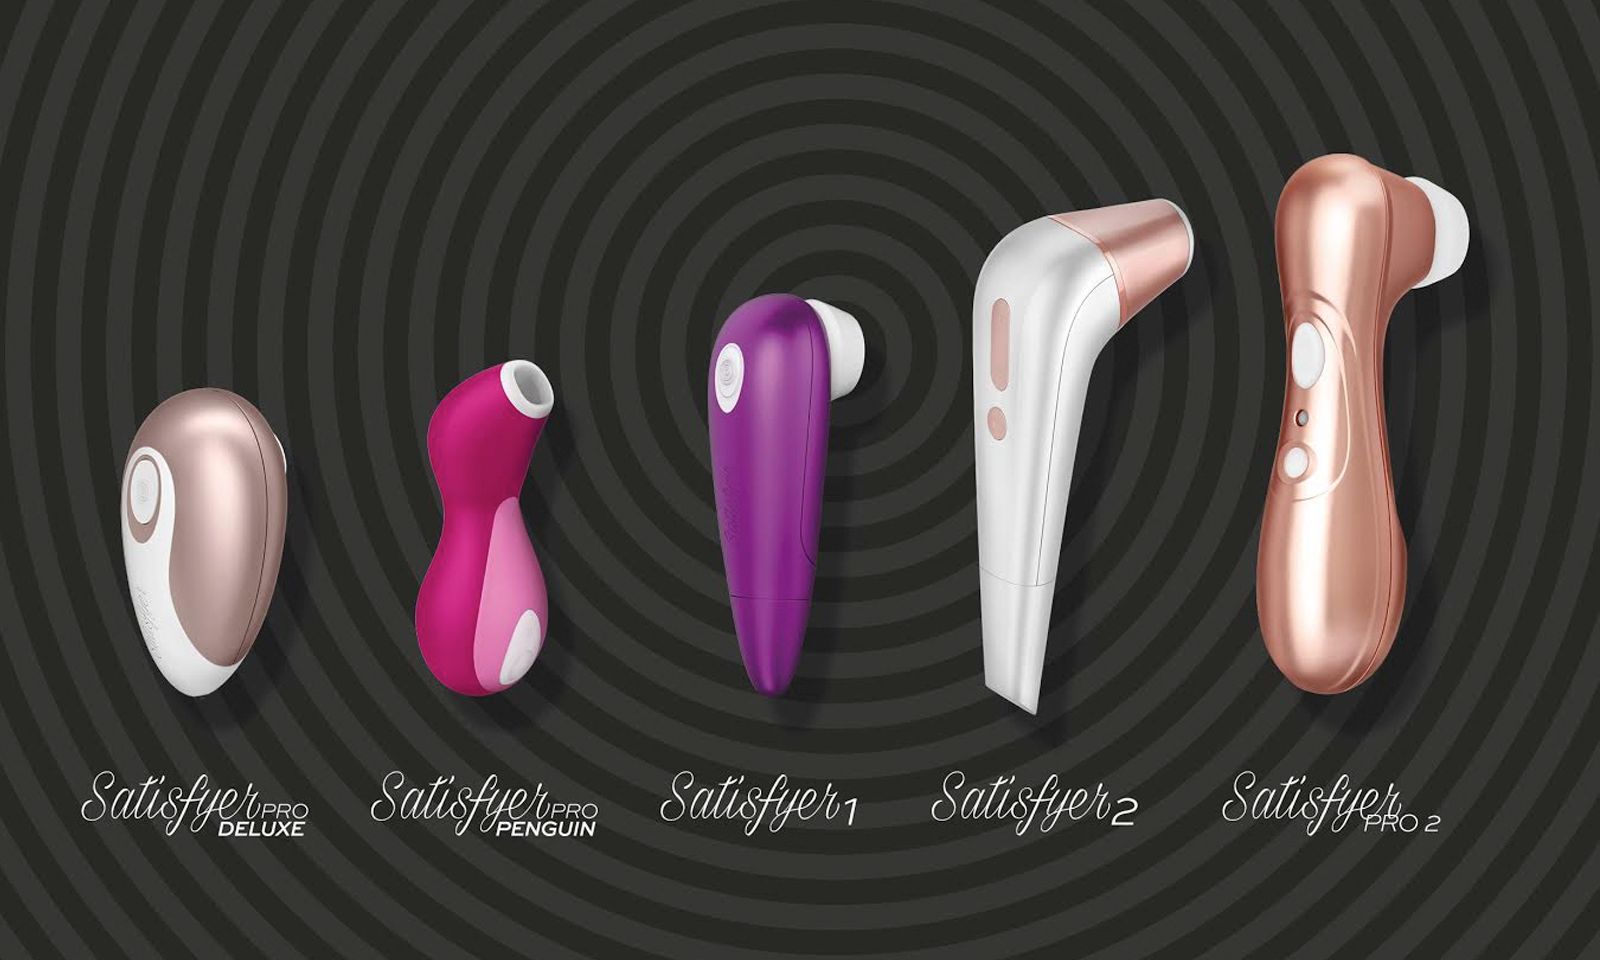 Makers Of Satisfyer Announce New Products